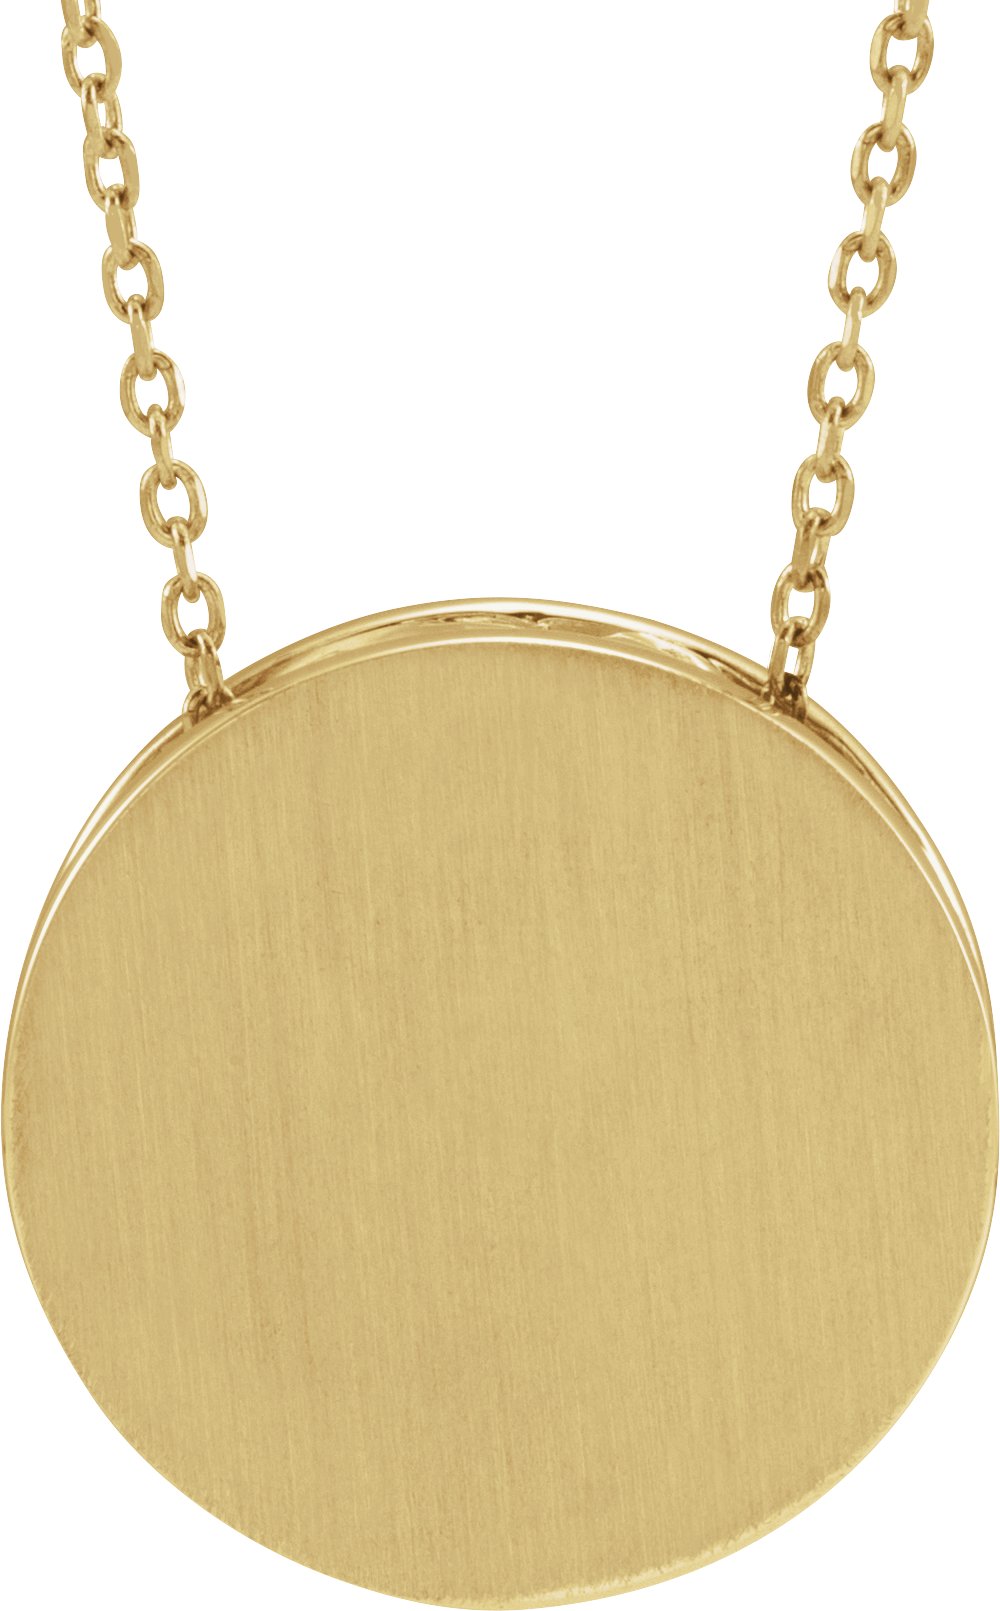 14K Yellow 17 mm Engravable Scroll Disc 16-18" Necklace